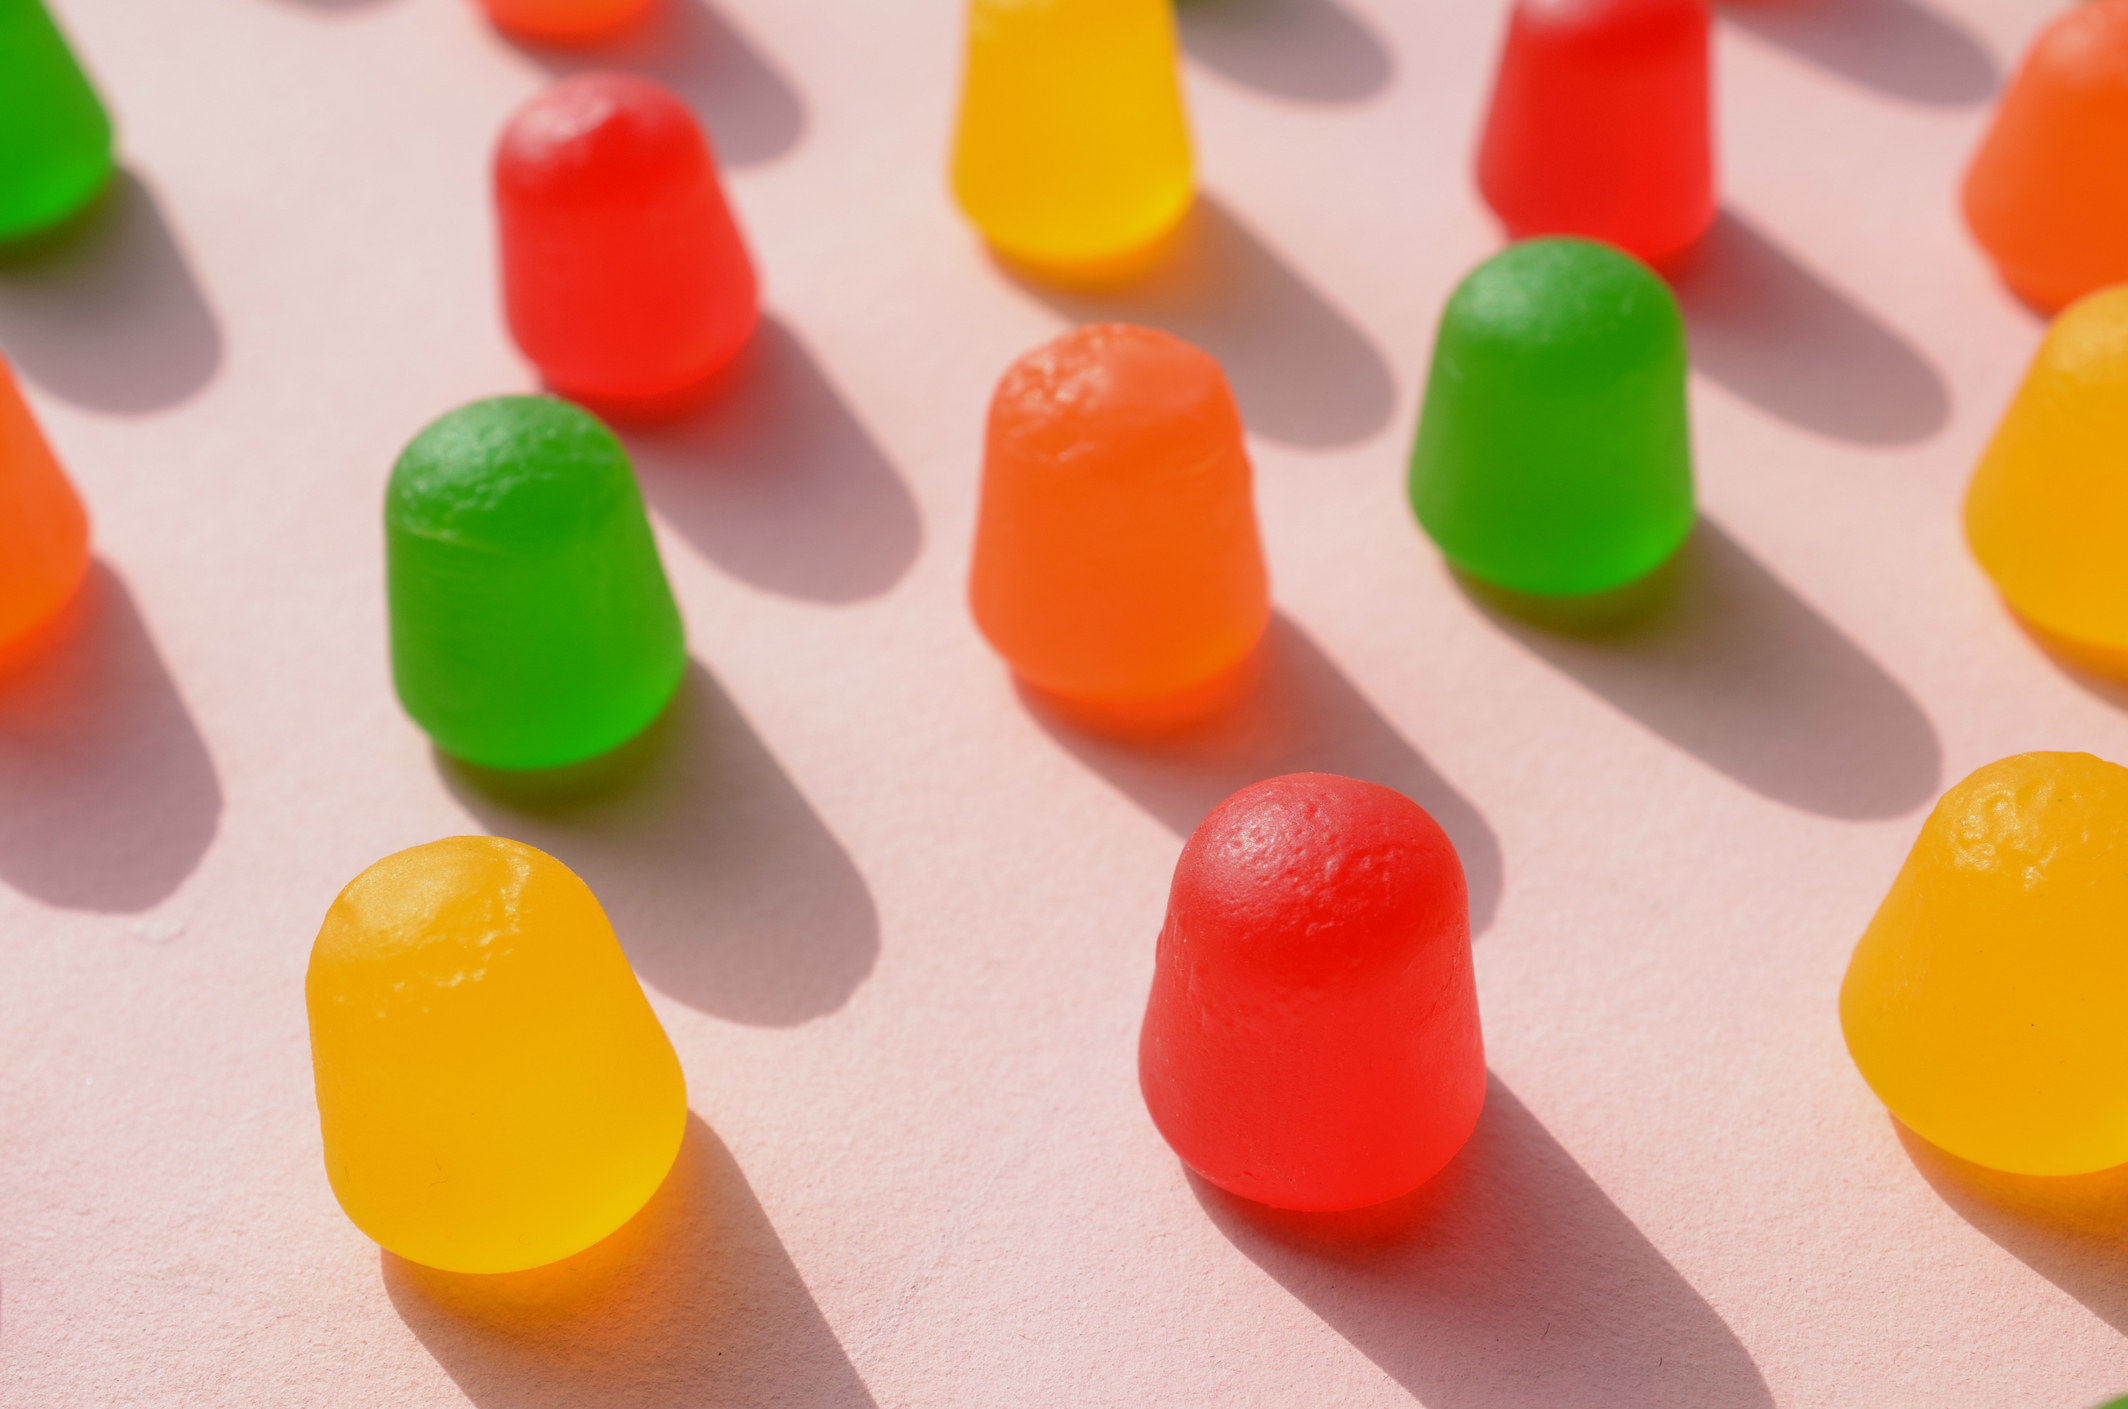 Colorful gumdrops arranged neatly on a solid background